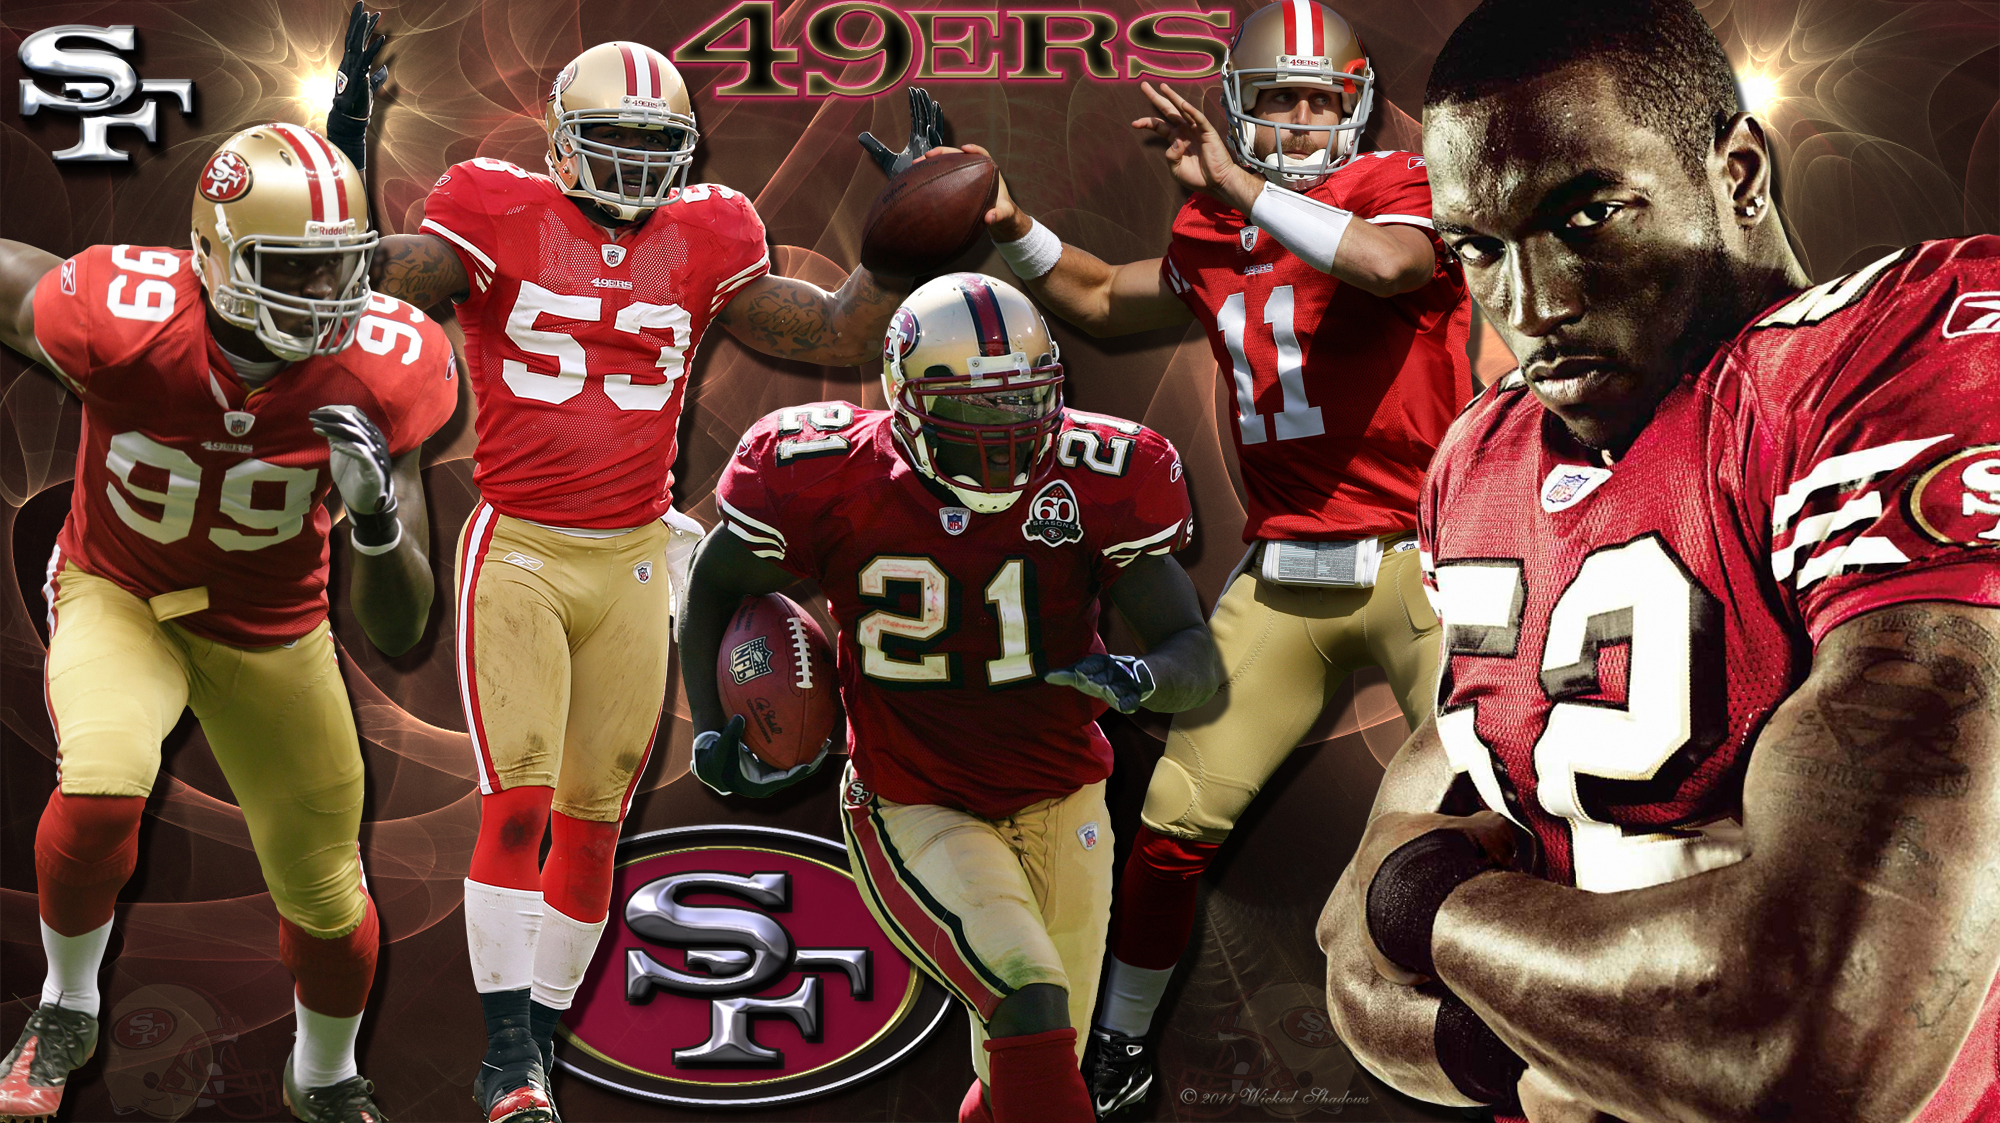 Wallpapers By Wicked Shadows San Francisco 49ers Team Wallpaper